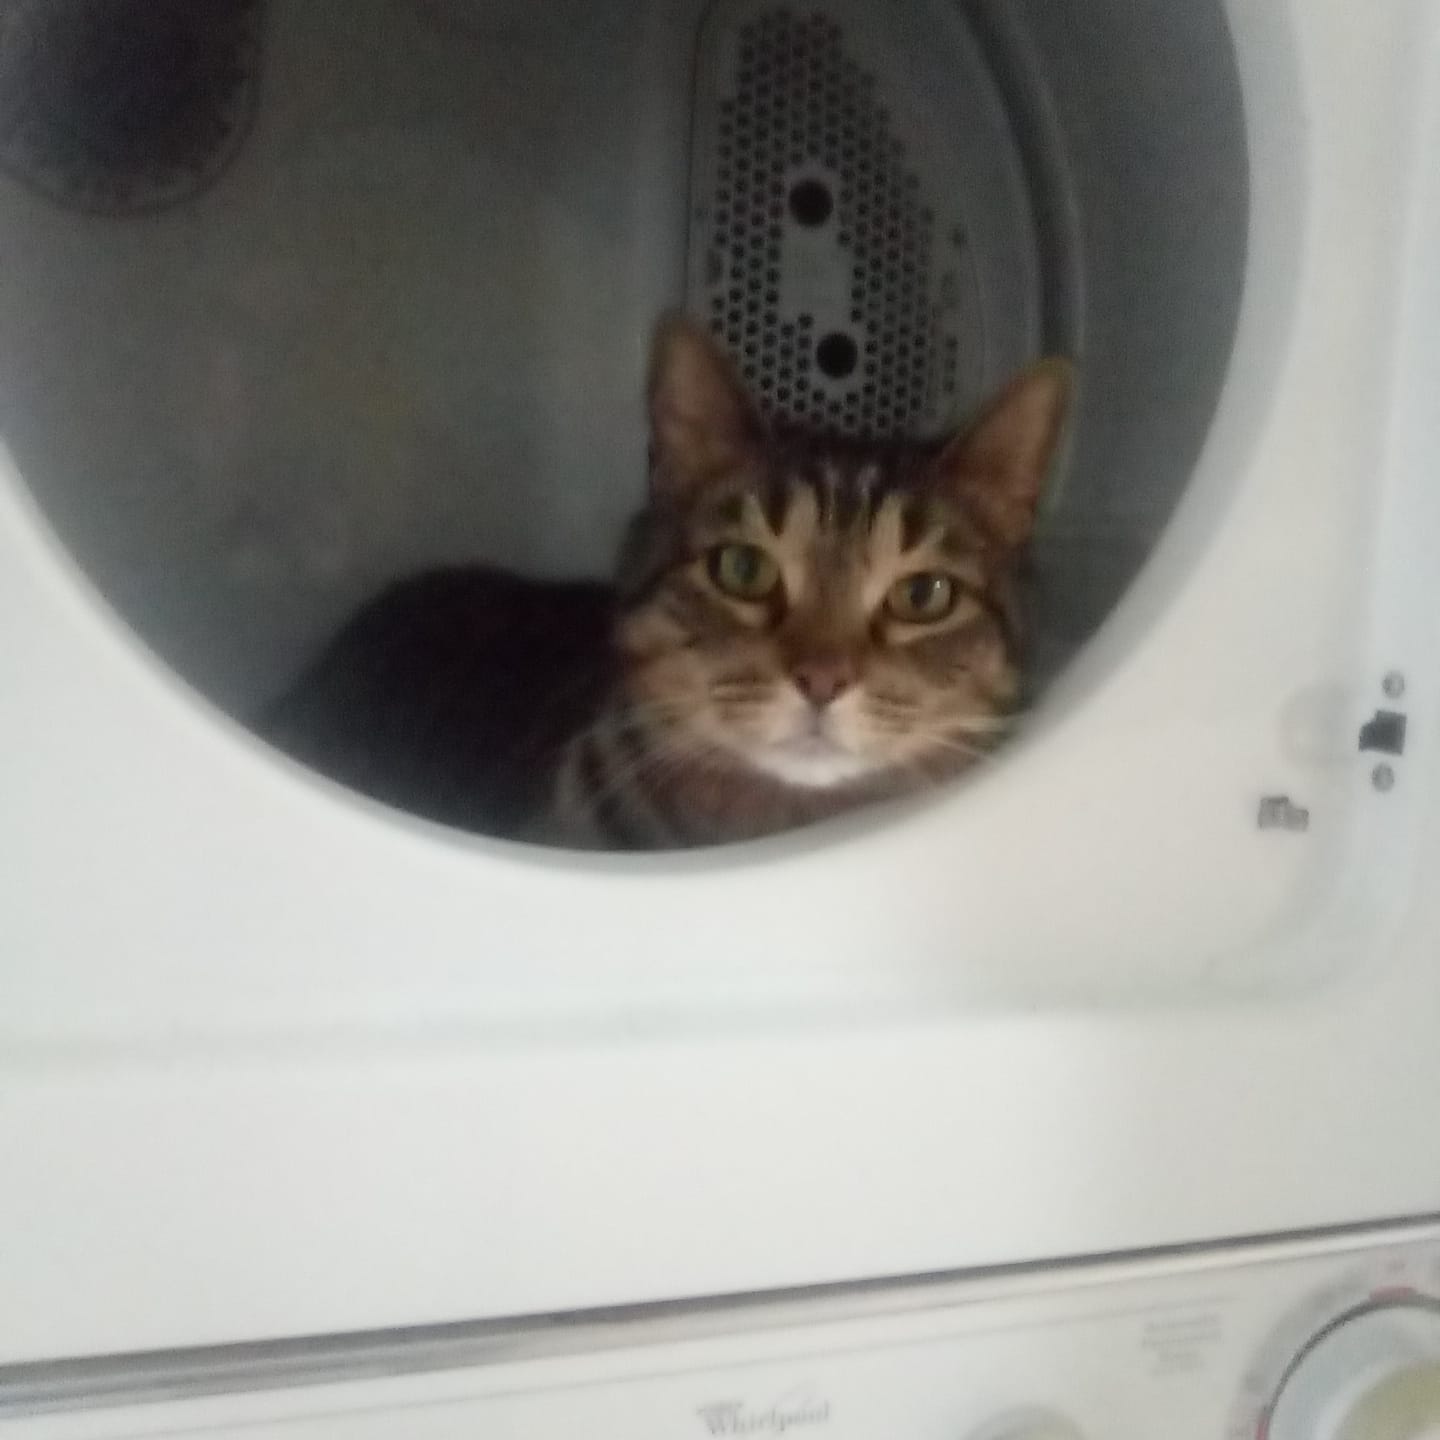 Buddy in the dryer